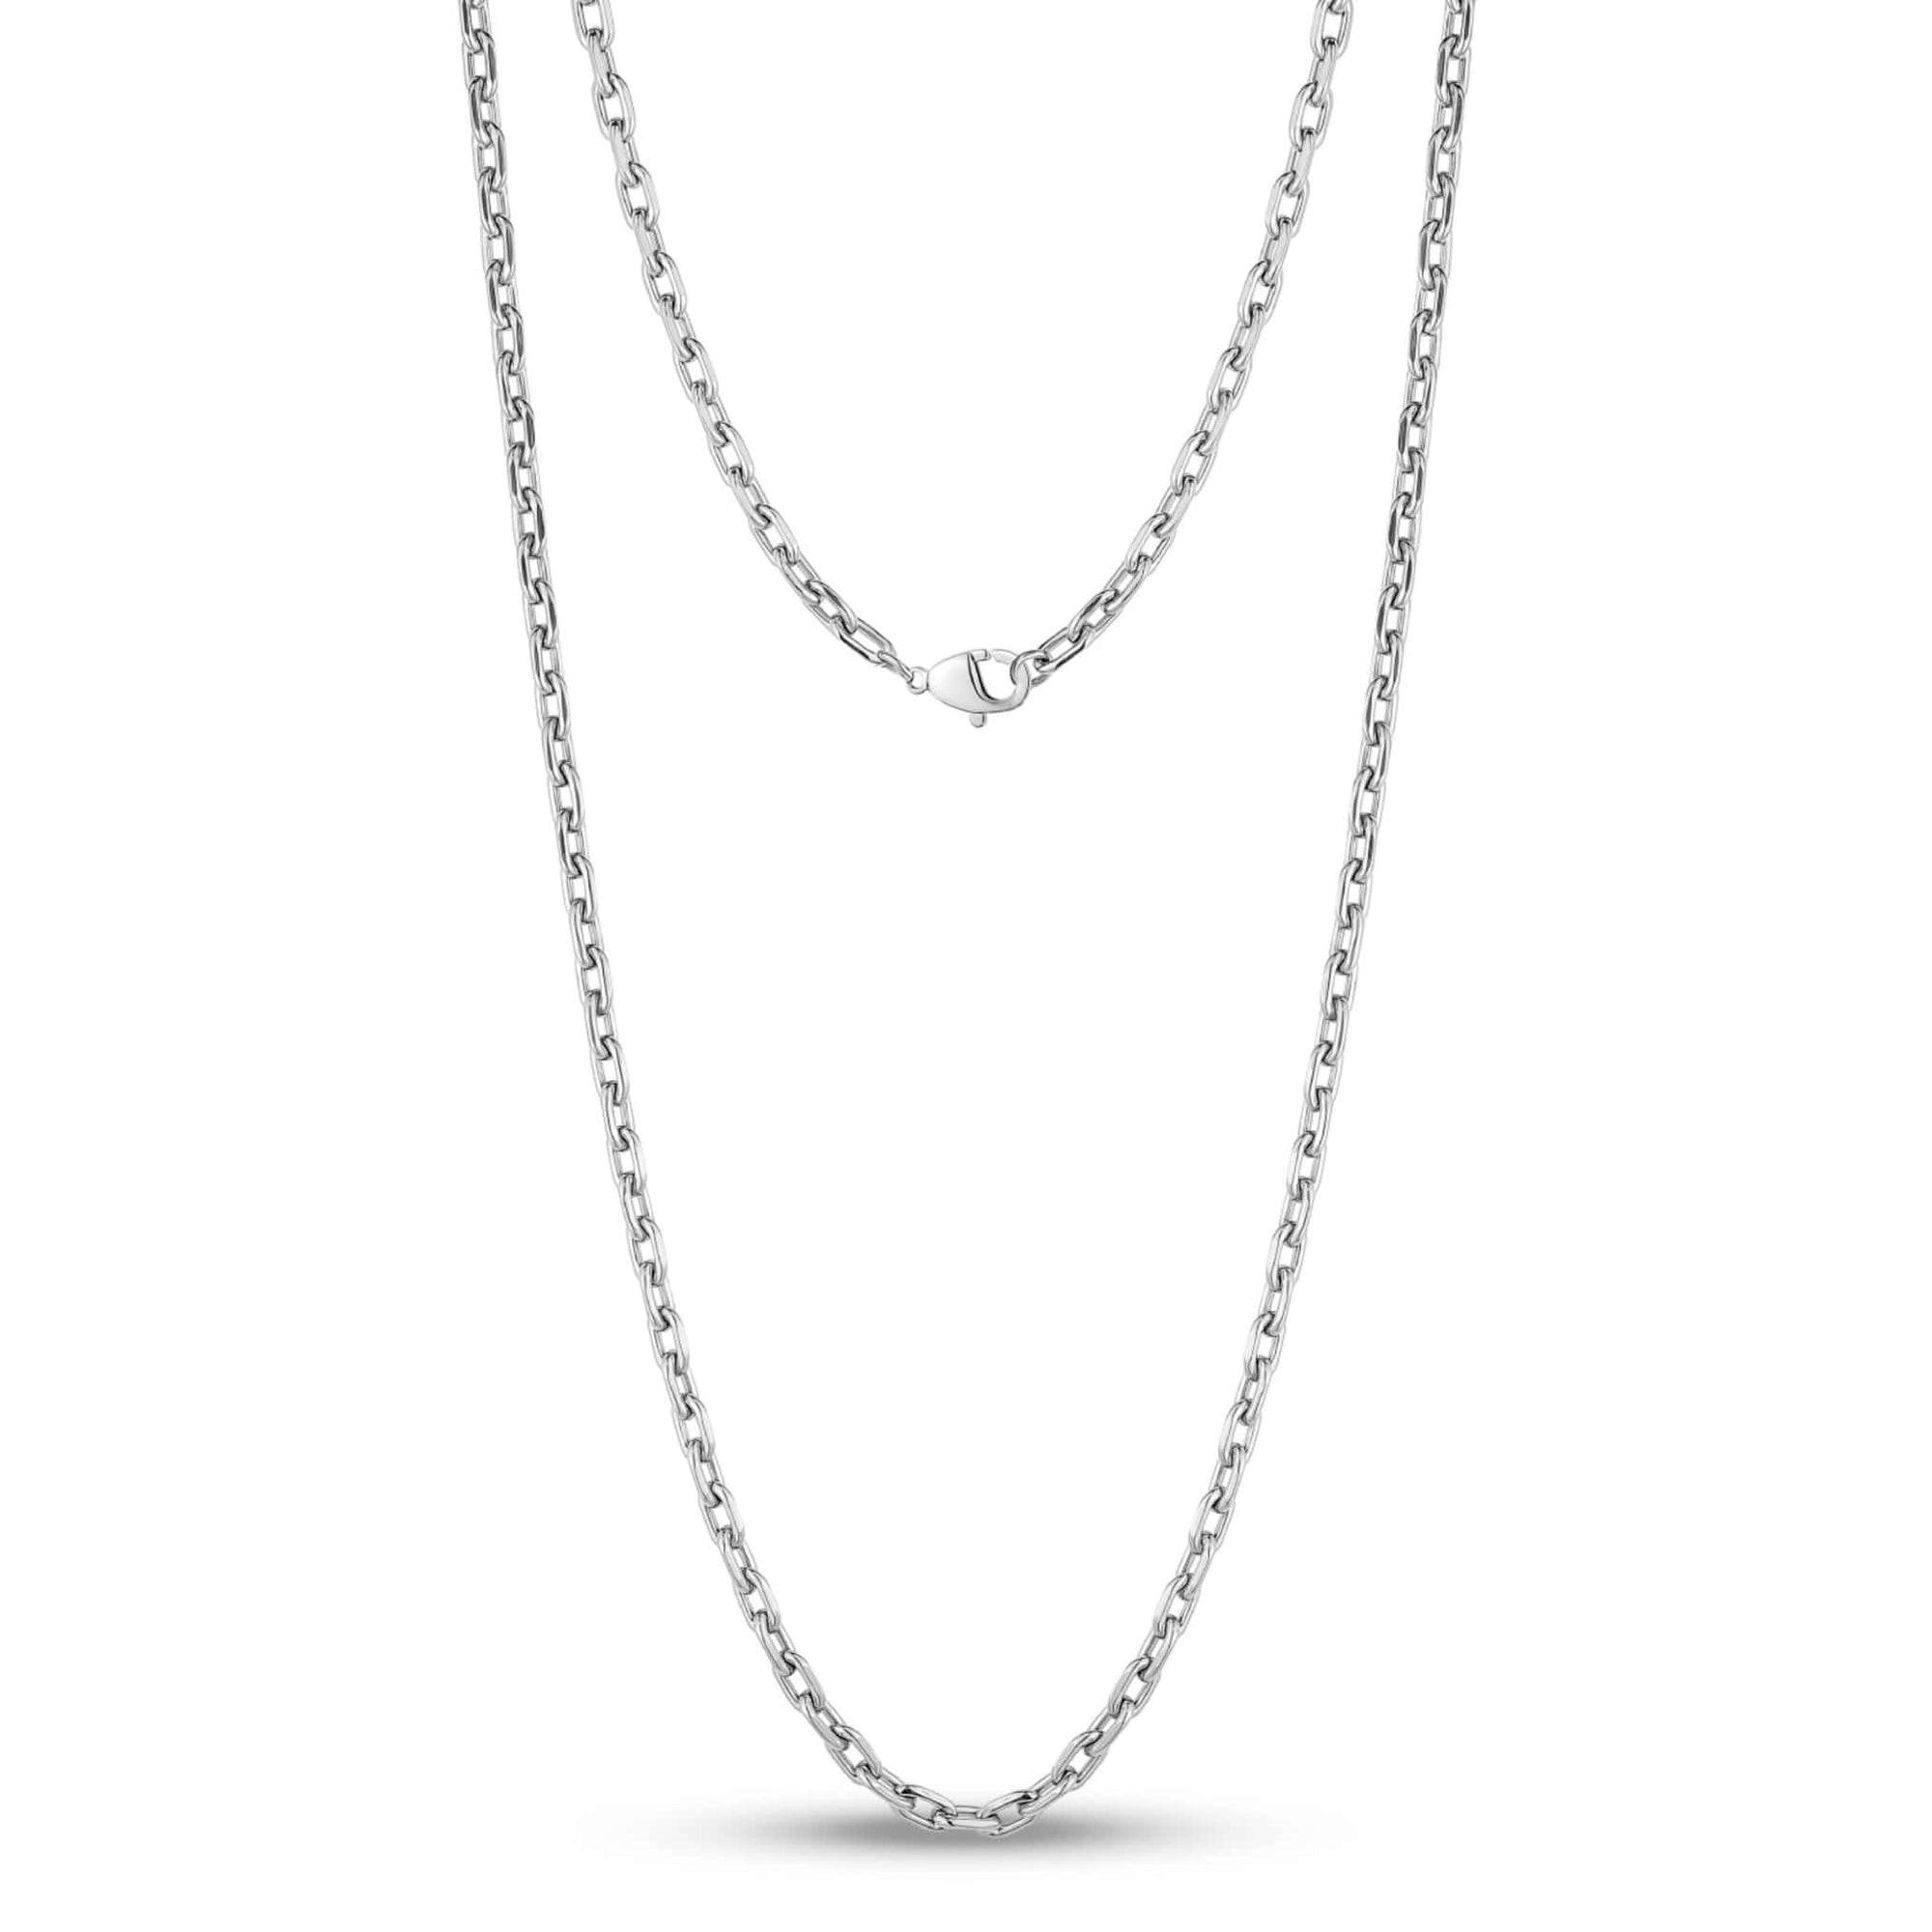 3.5mm Stainless Steel Oval Link Necklace at Arman's Jewellers 